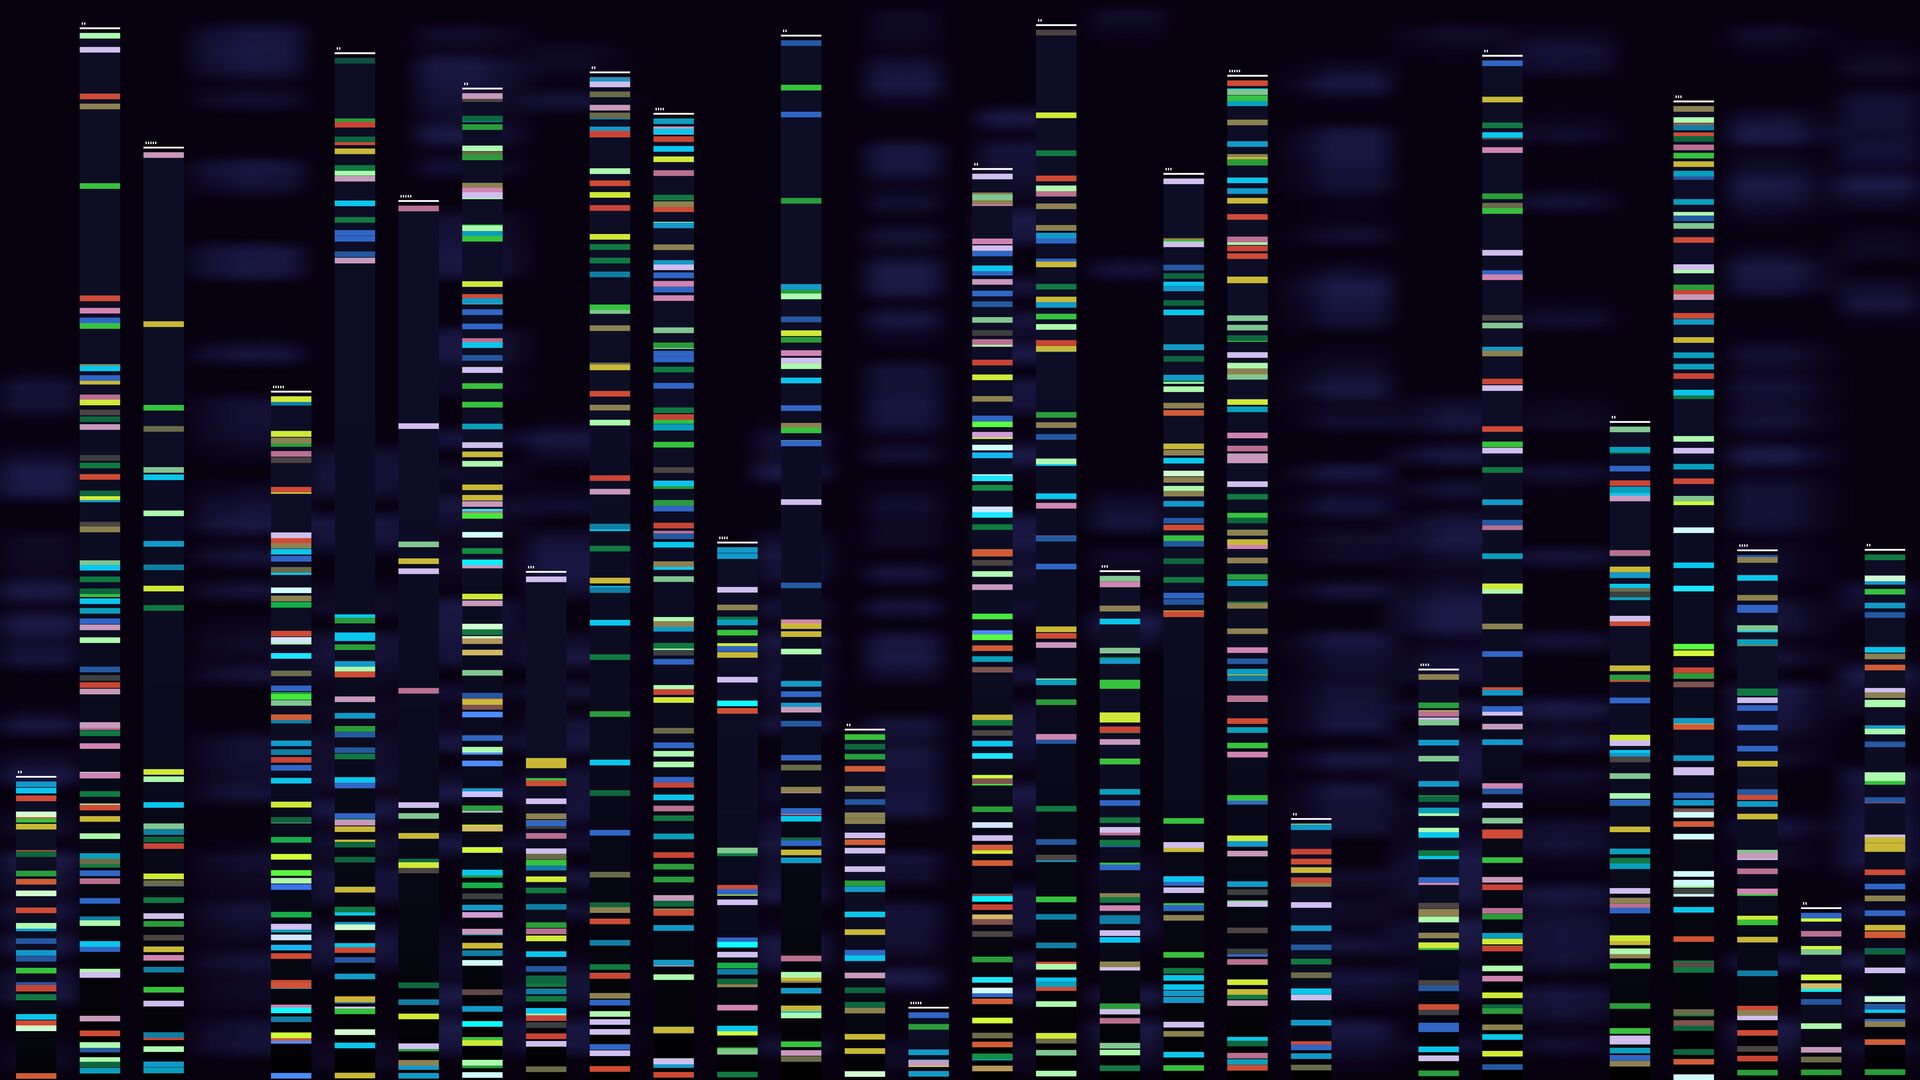 Image represents both the video interview format and the mapping of the genome, relevant to the life sciences.